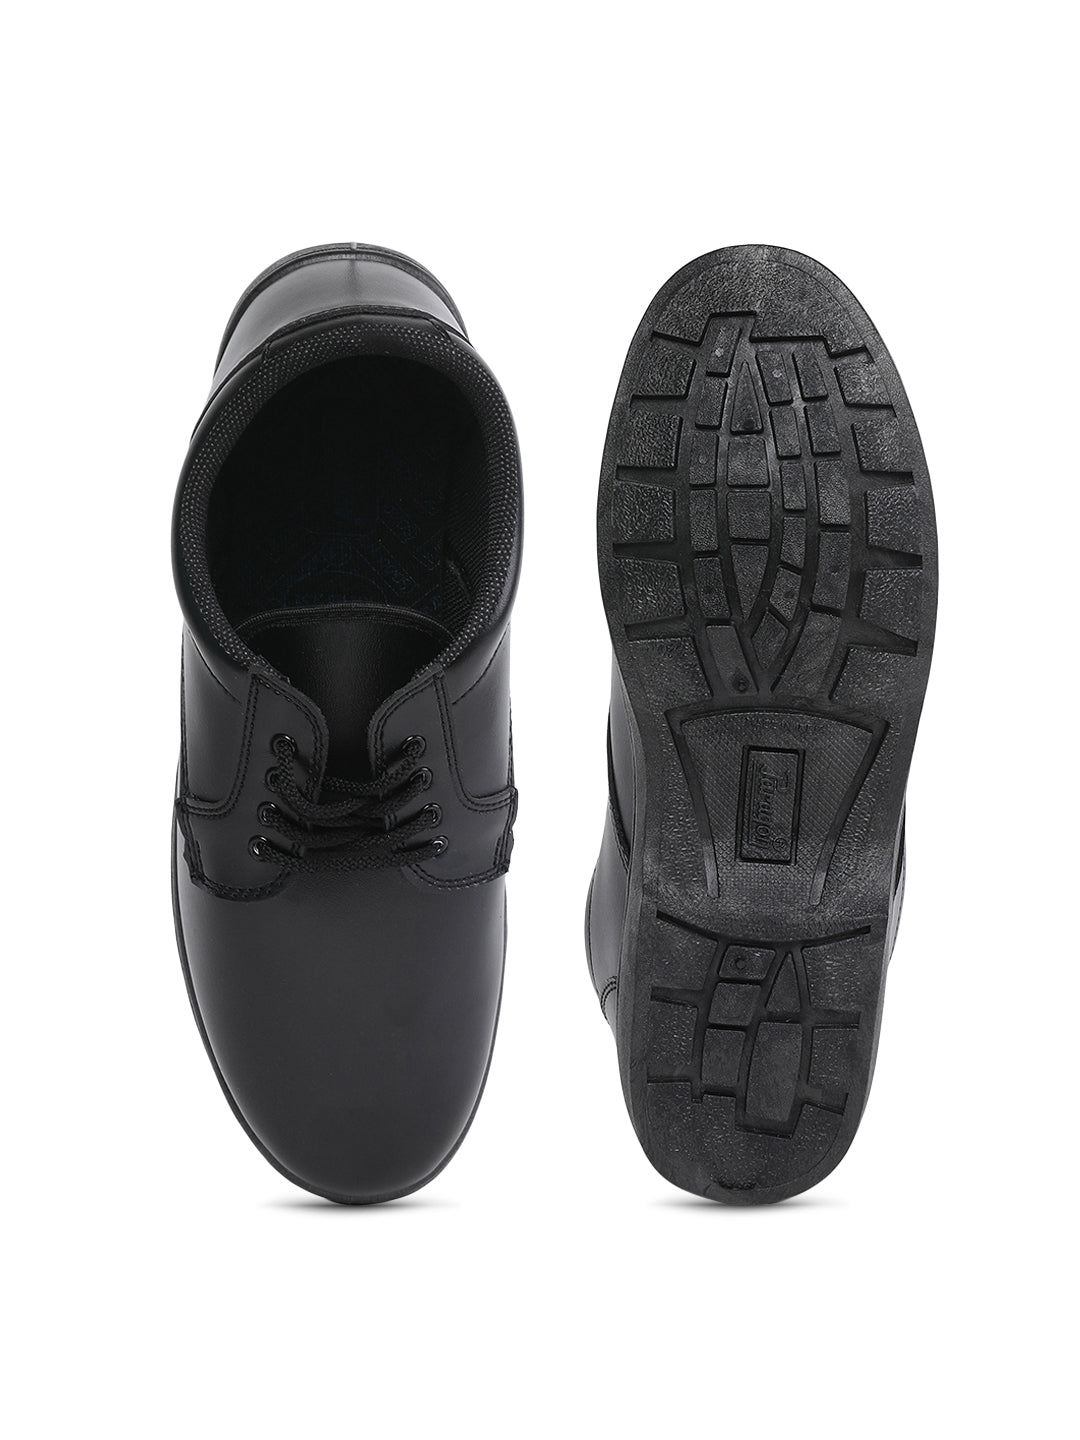 Paragon  PV0751T Kids Formal School Shoes | Comfortable Cushioned Soles | School Shoes for Boys &amp; Girls